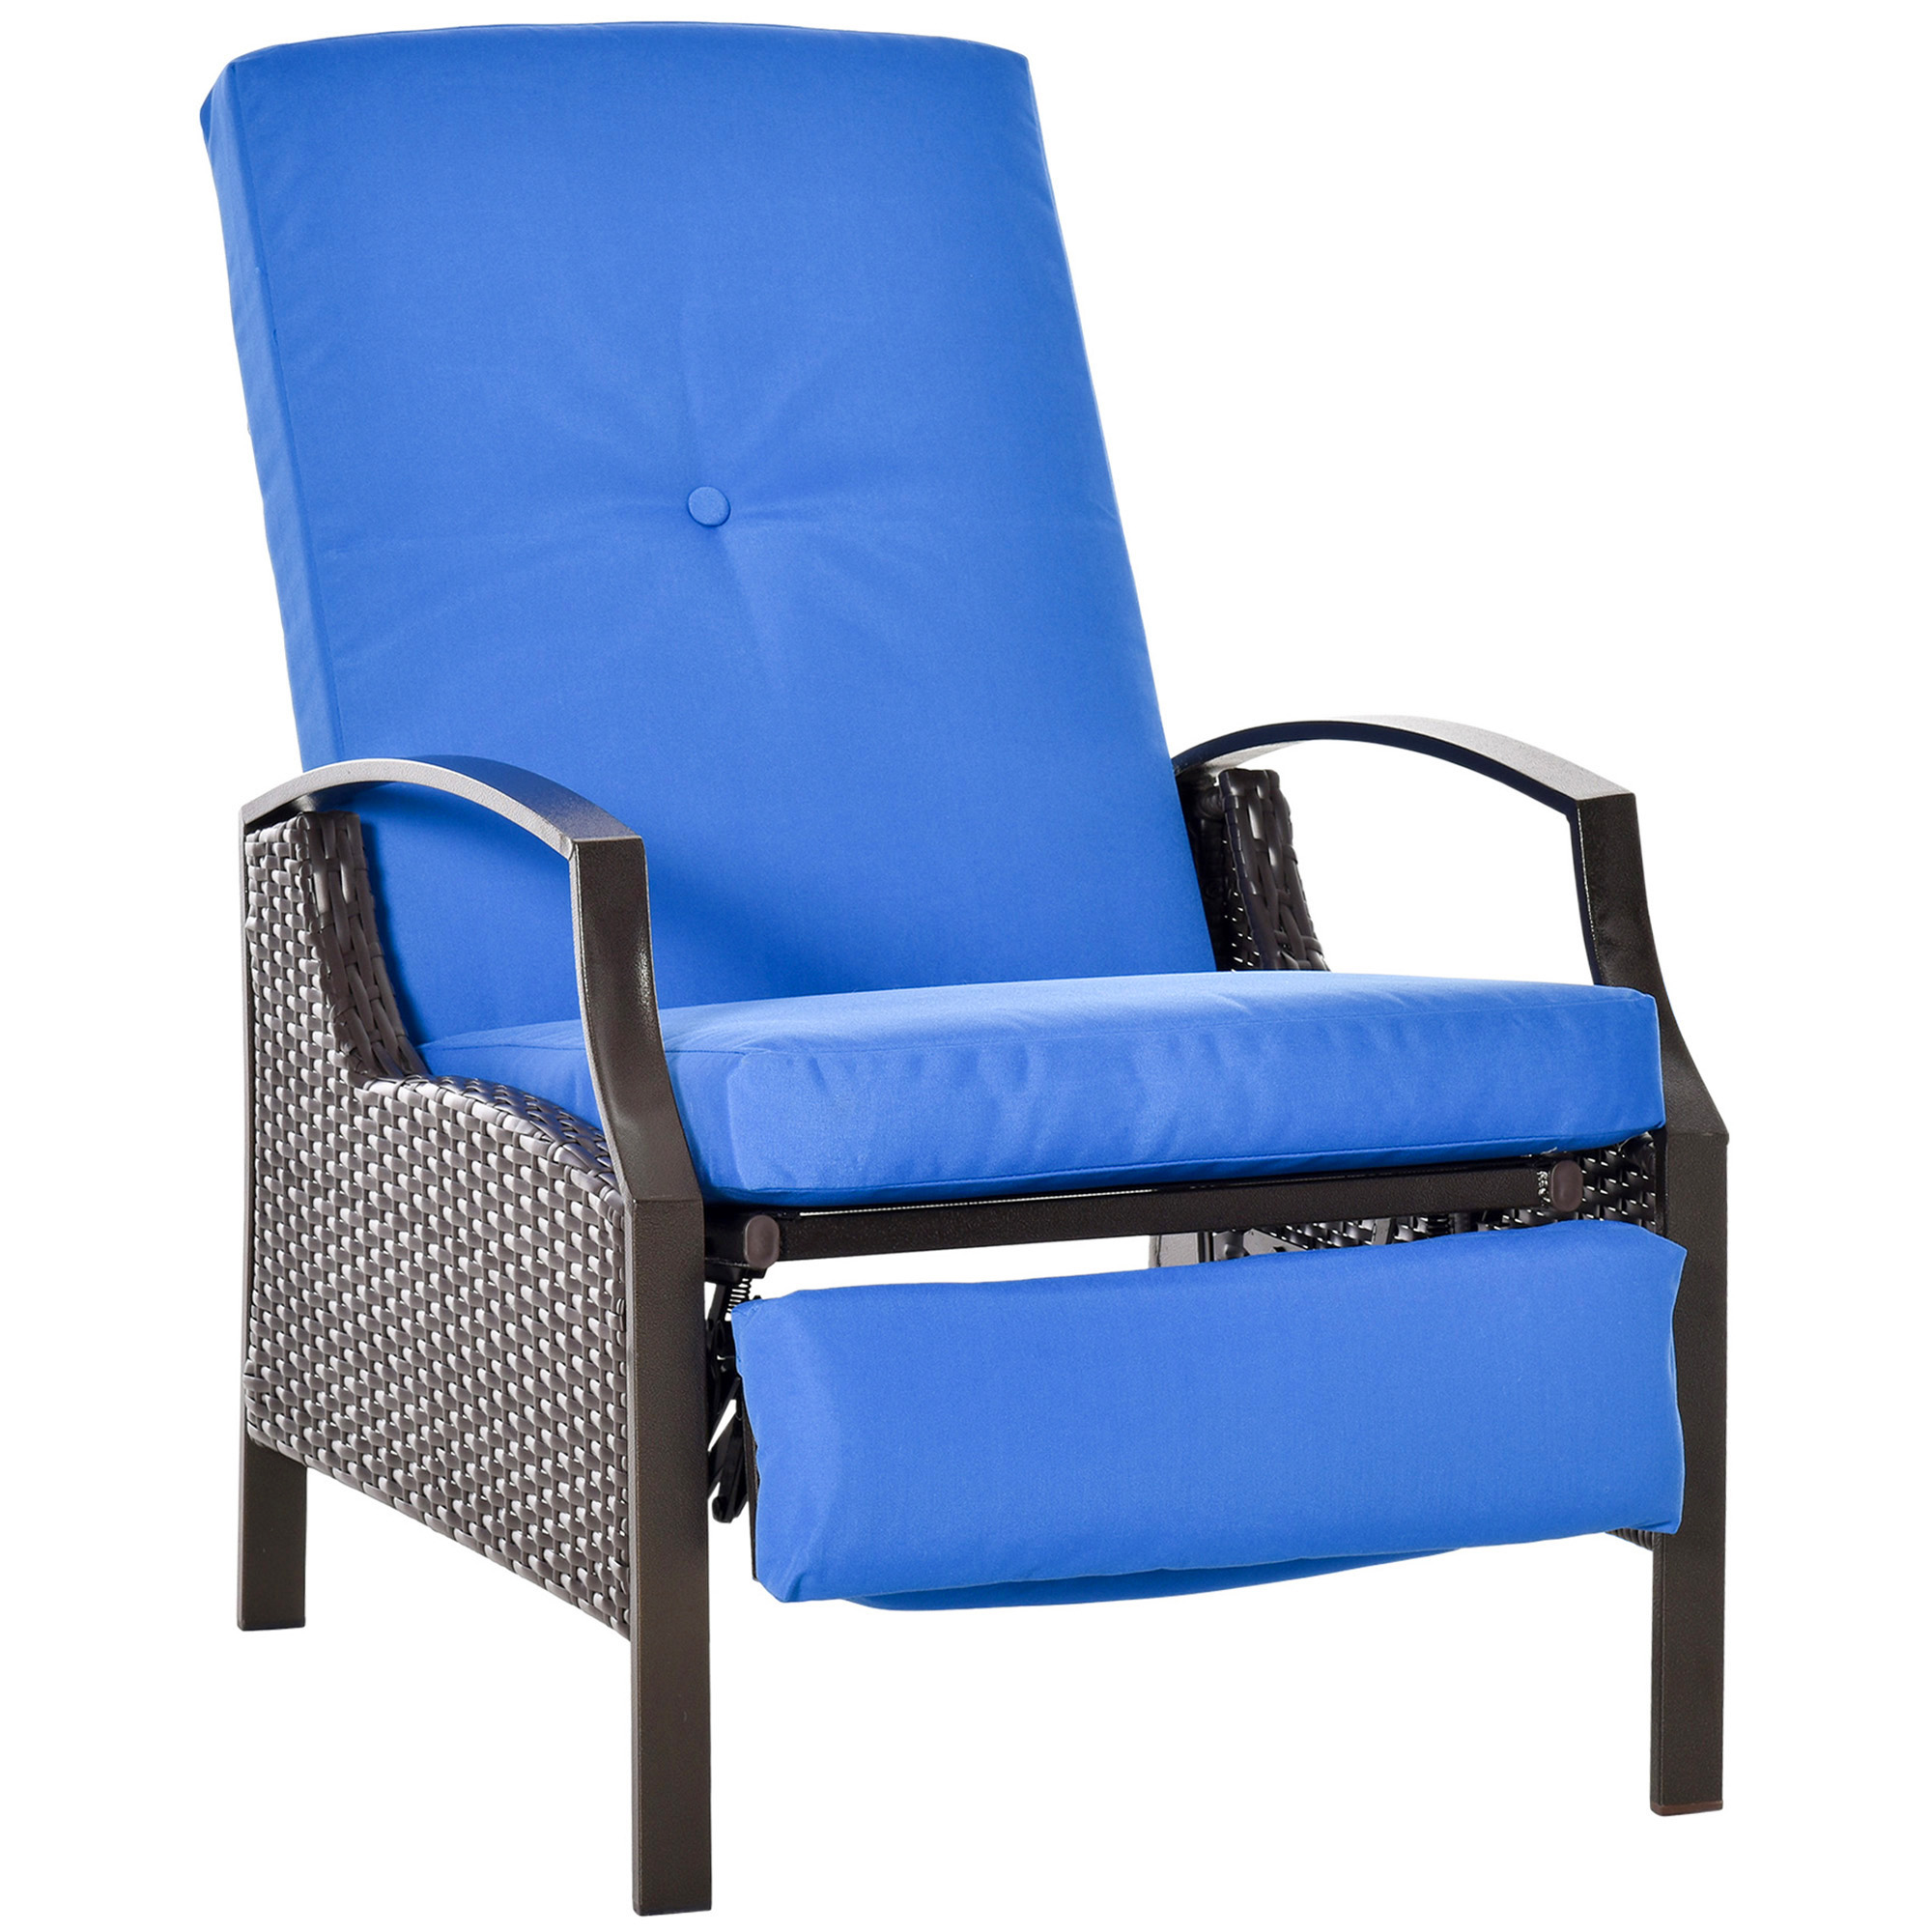 Outsunny Outdoor Recliner, Reclining Chair w/ Footrest & Cushions, Blue - image 1 of 9